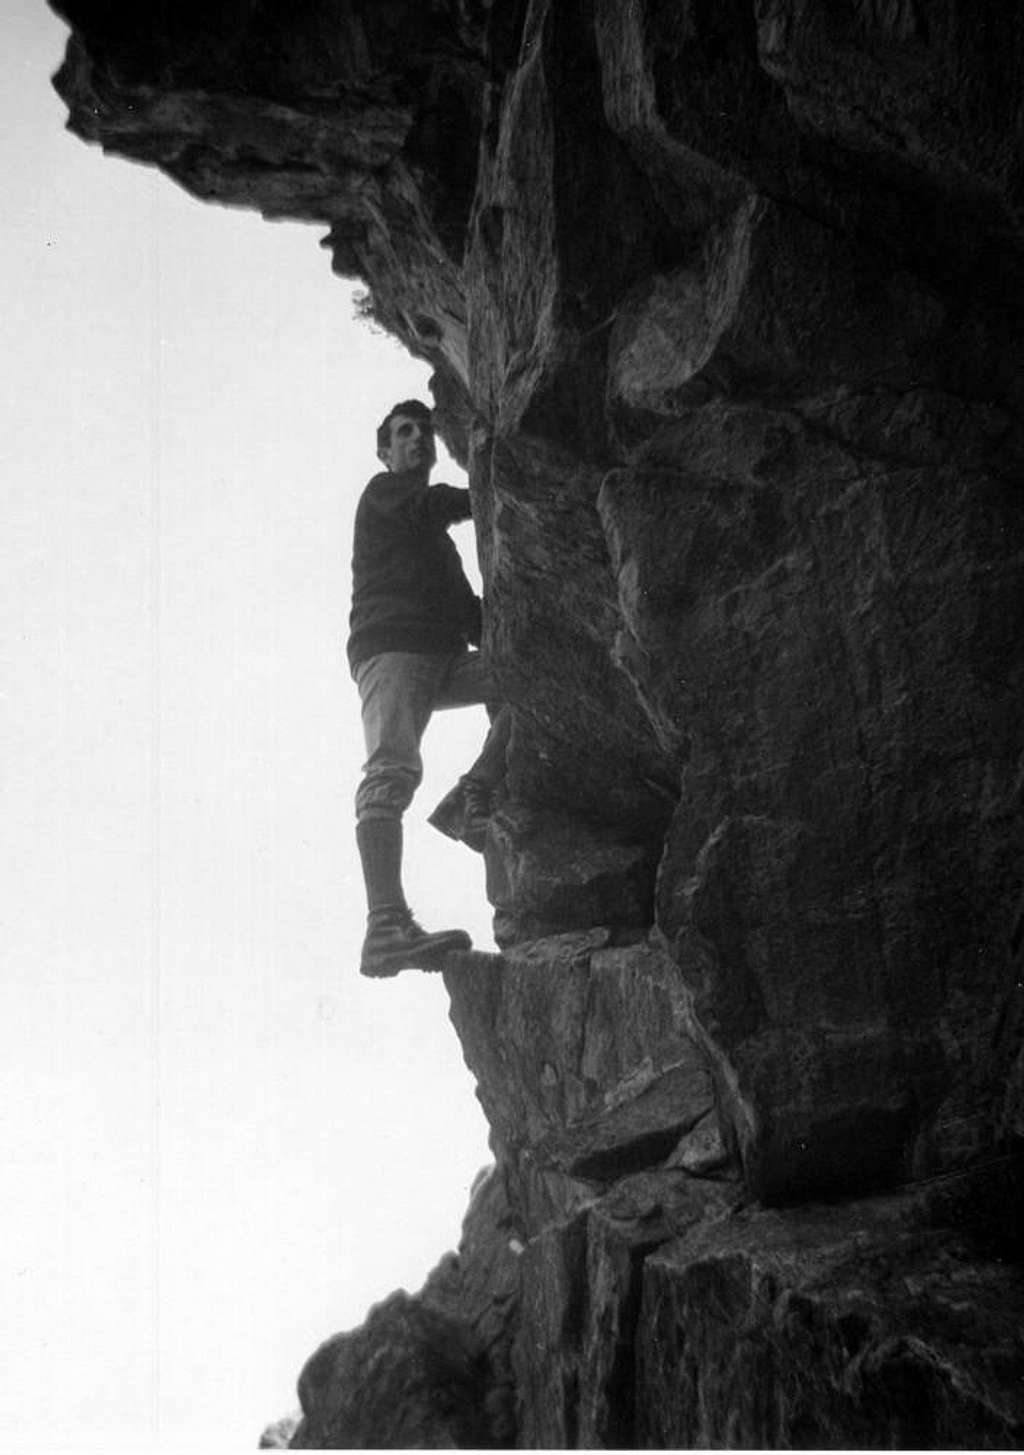 Nearly Seven Authors in B&W (By Ilario) Climbing 1967